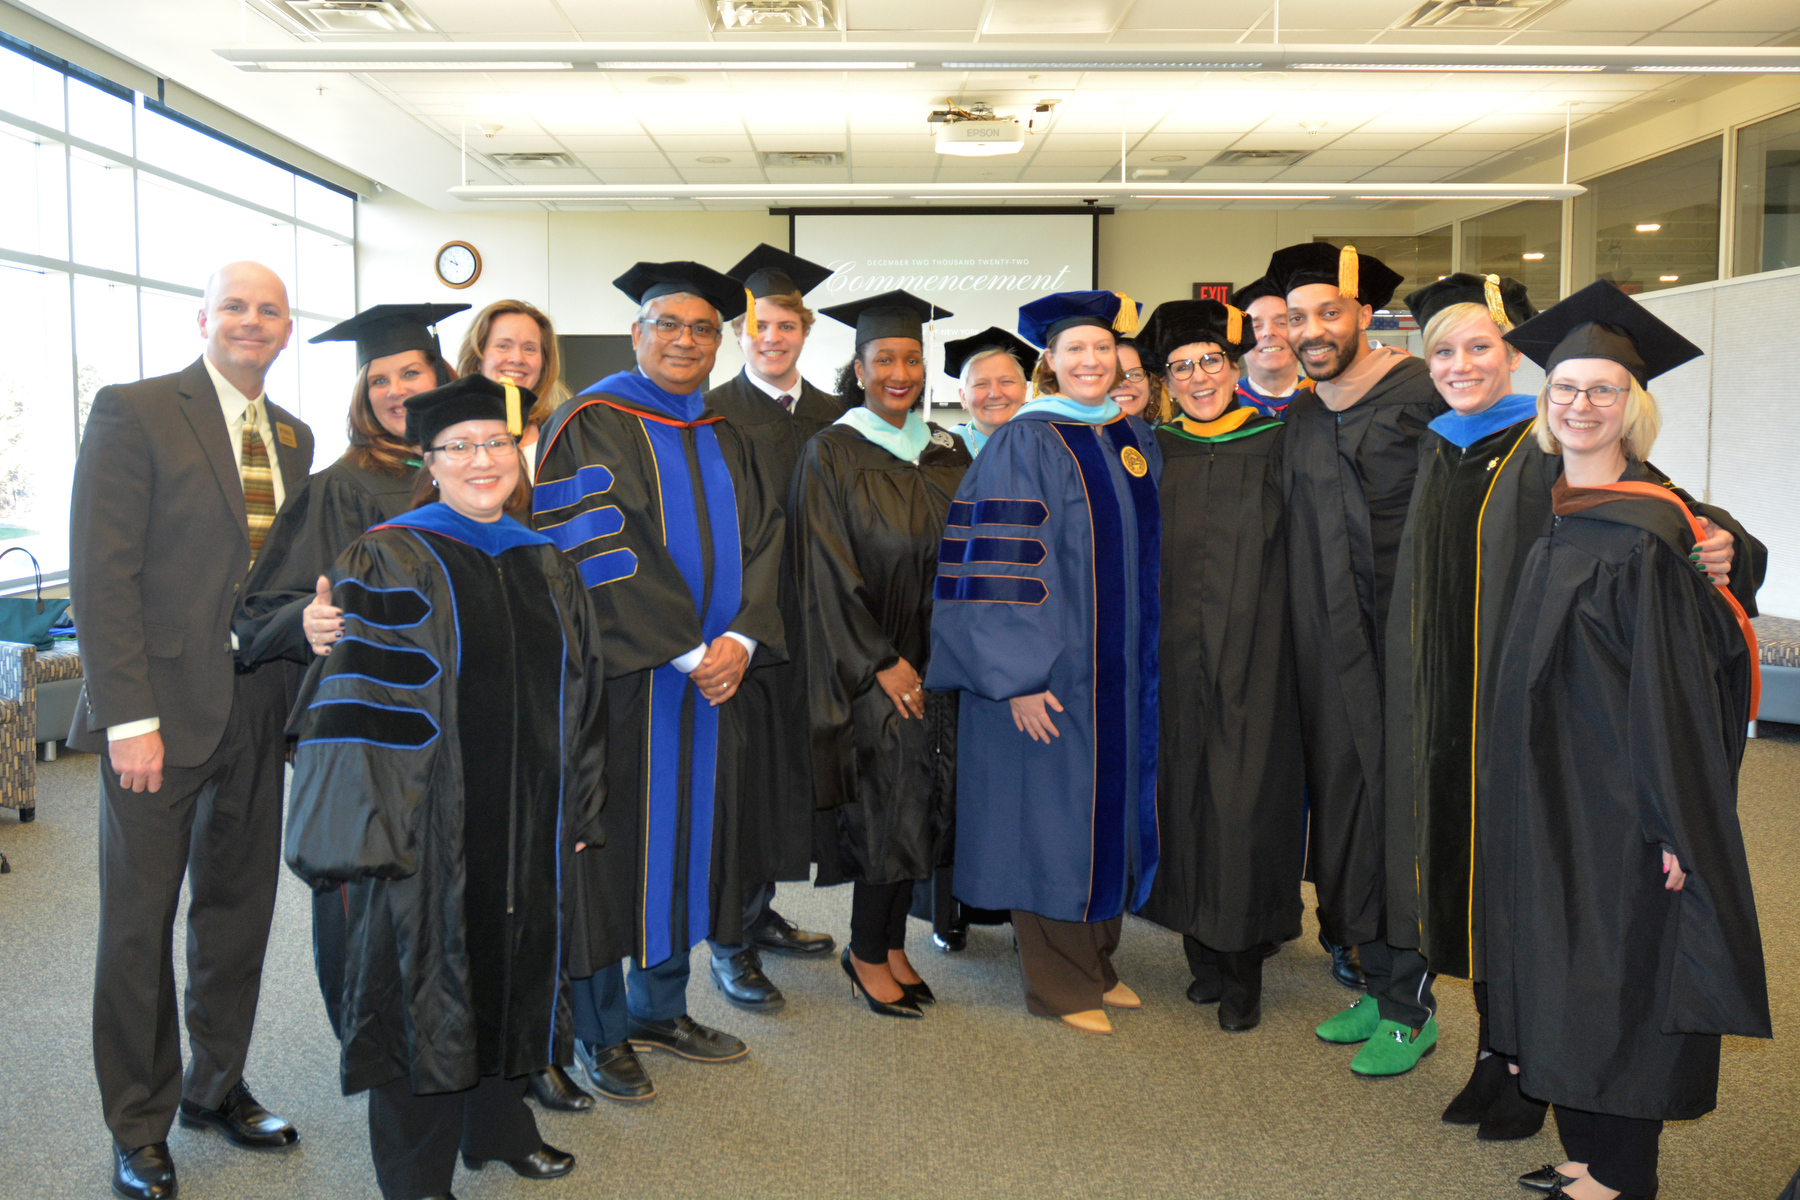 Cameron E. Jones, pictured third from right, gathers with college faculty and administrators prior to the December Commencement ceremony held Dec. 10 in Marano Campus Center. A 2009 SUNY Oswego broadcasting and mass communication graduate and manager of development for integrated content strategy for ABC News Studios, Jones served as the Commencement speaker.